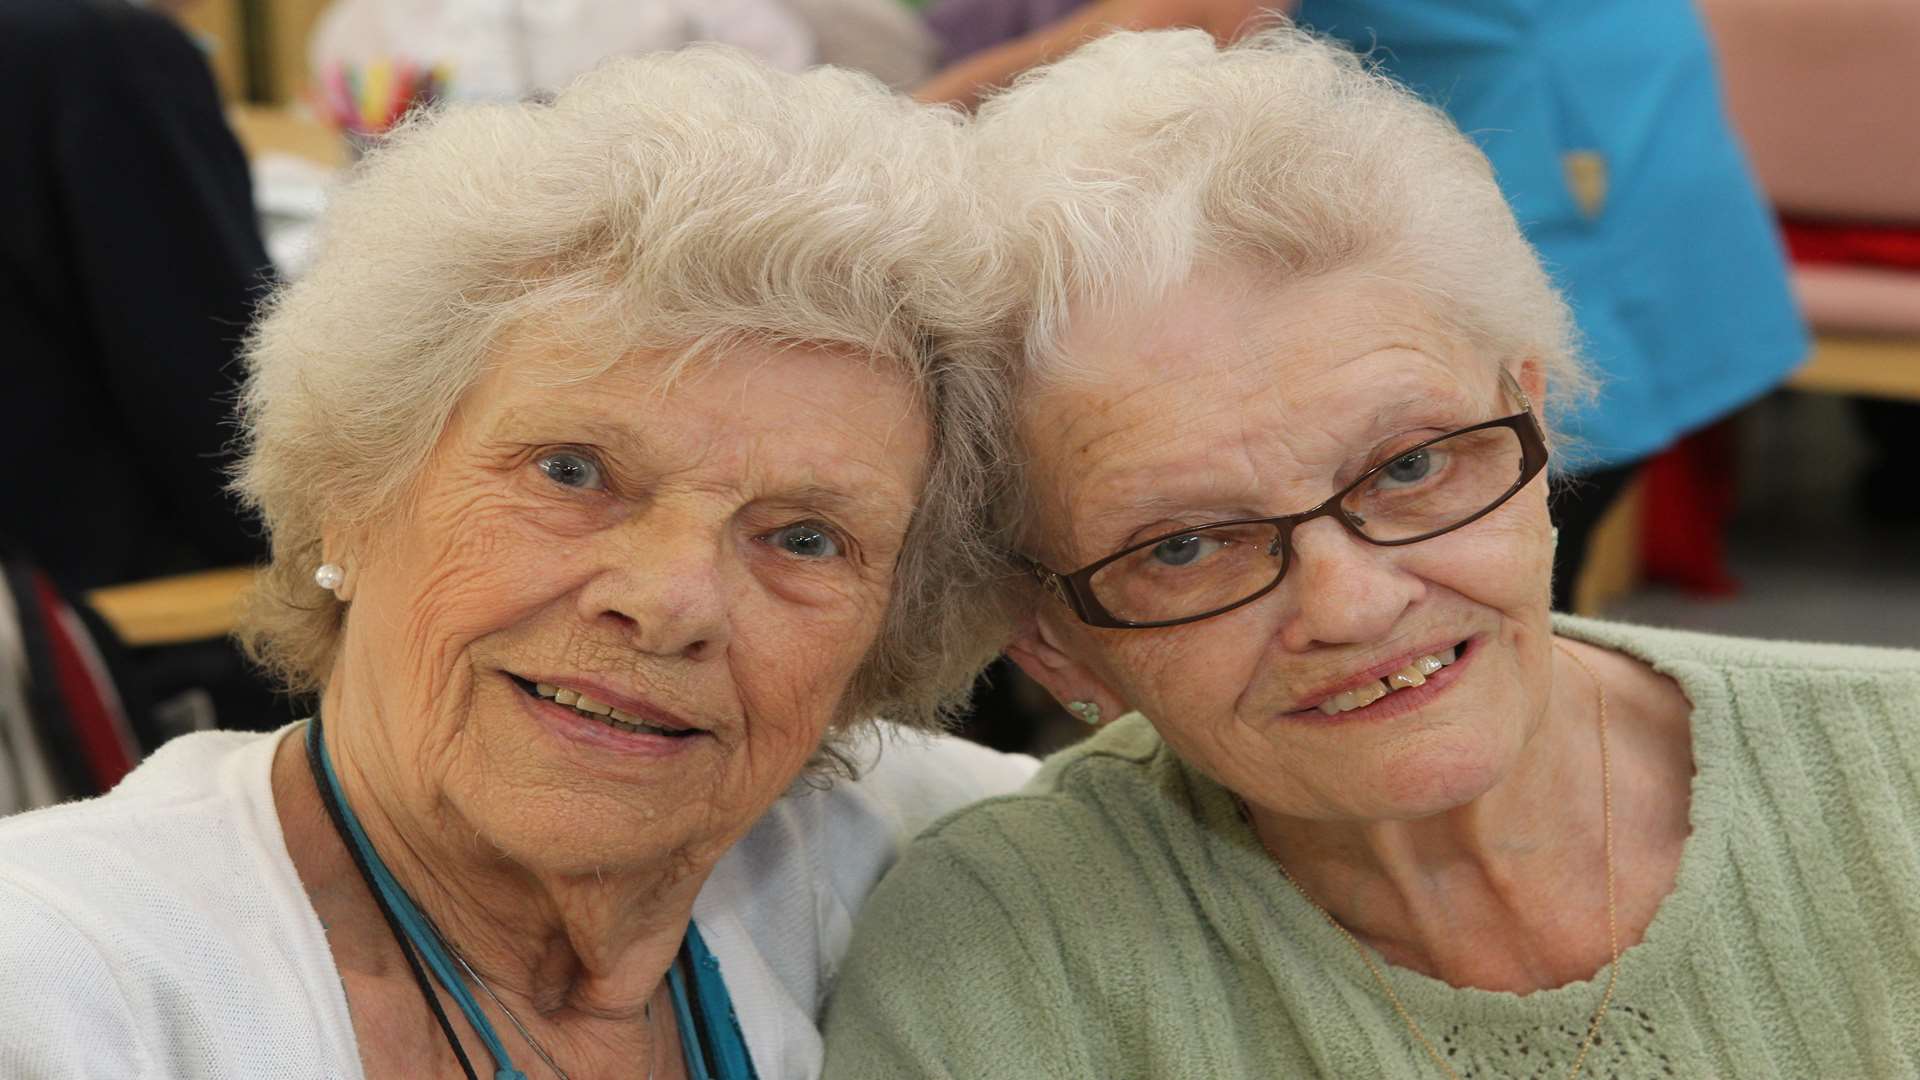 Jean Johnson and Marlene Wise, both 83, have been friends since school